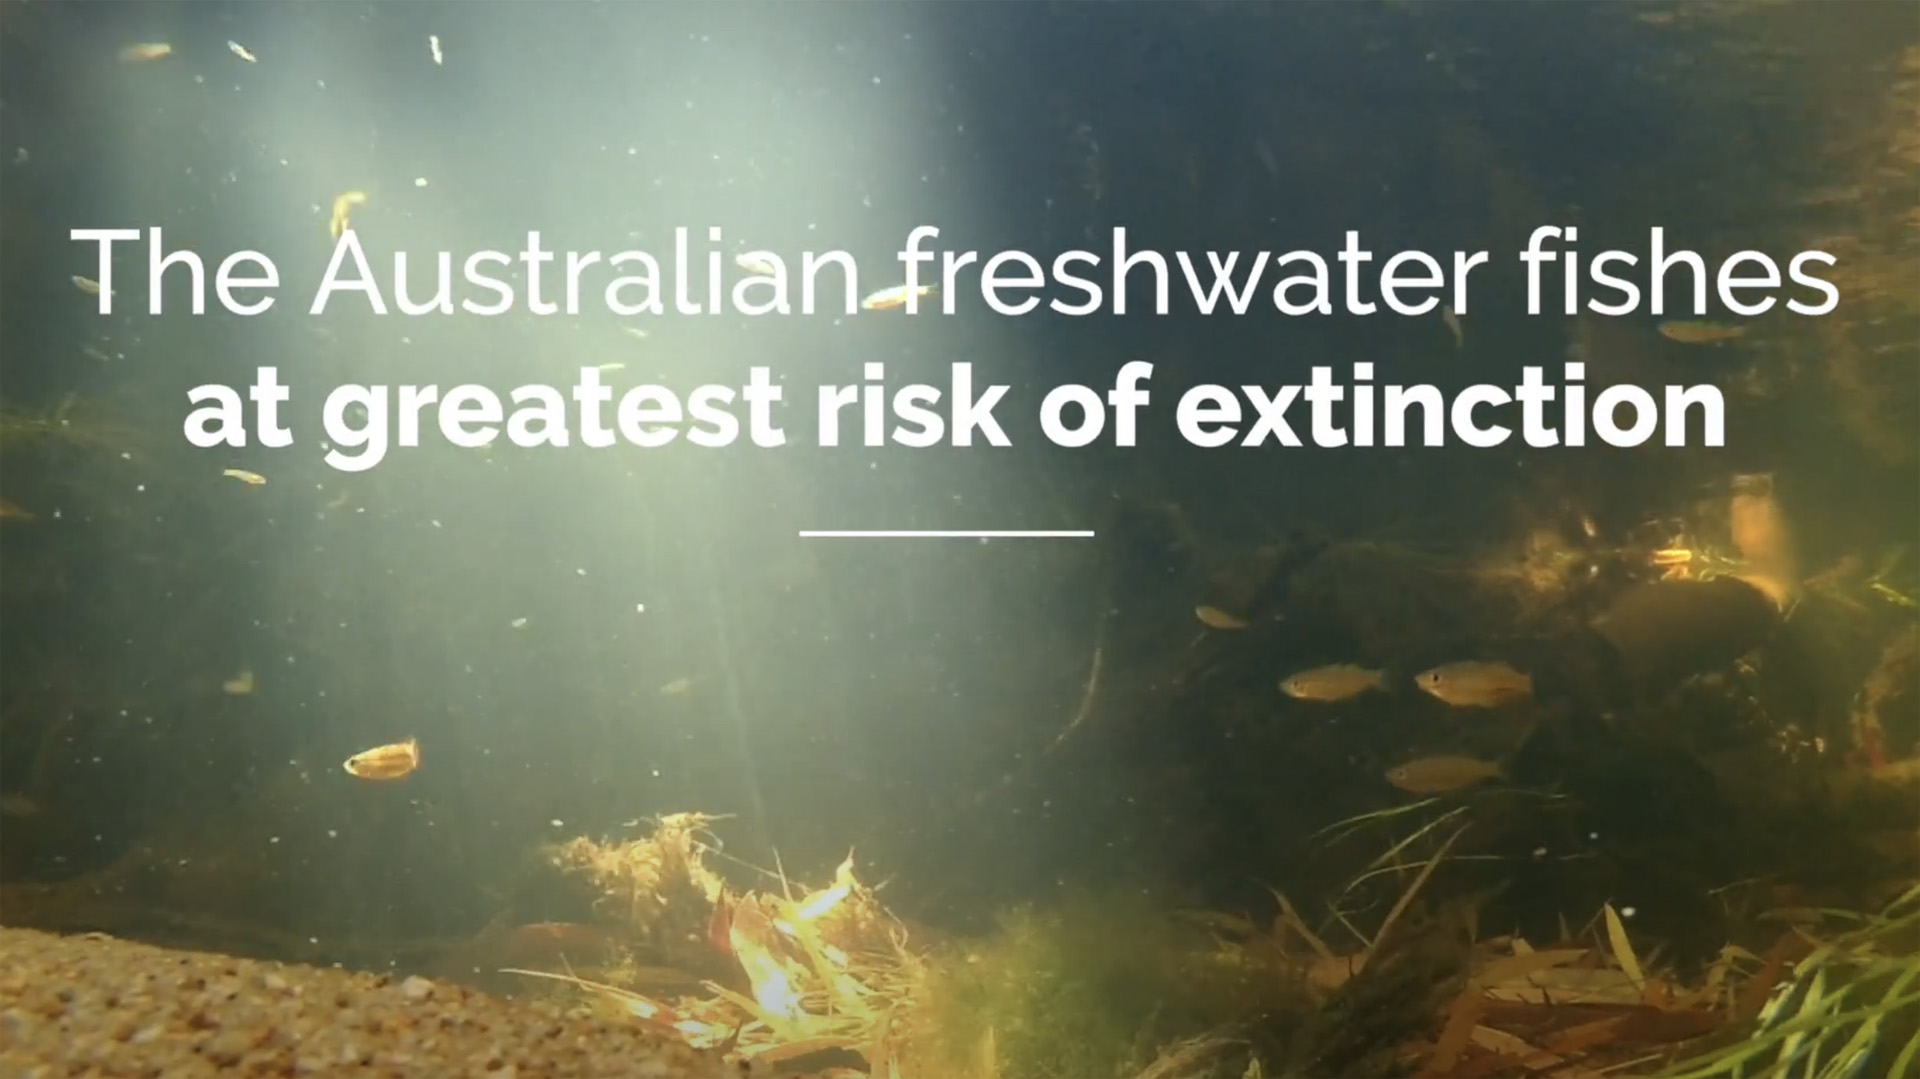 The Australian freshwater fishes at greatest risk of extinction